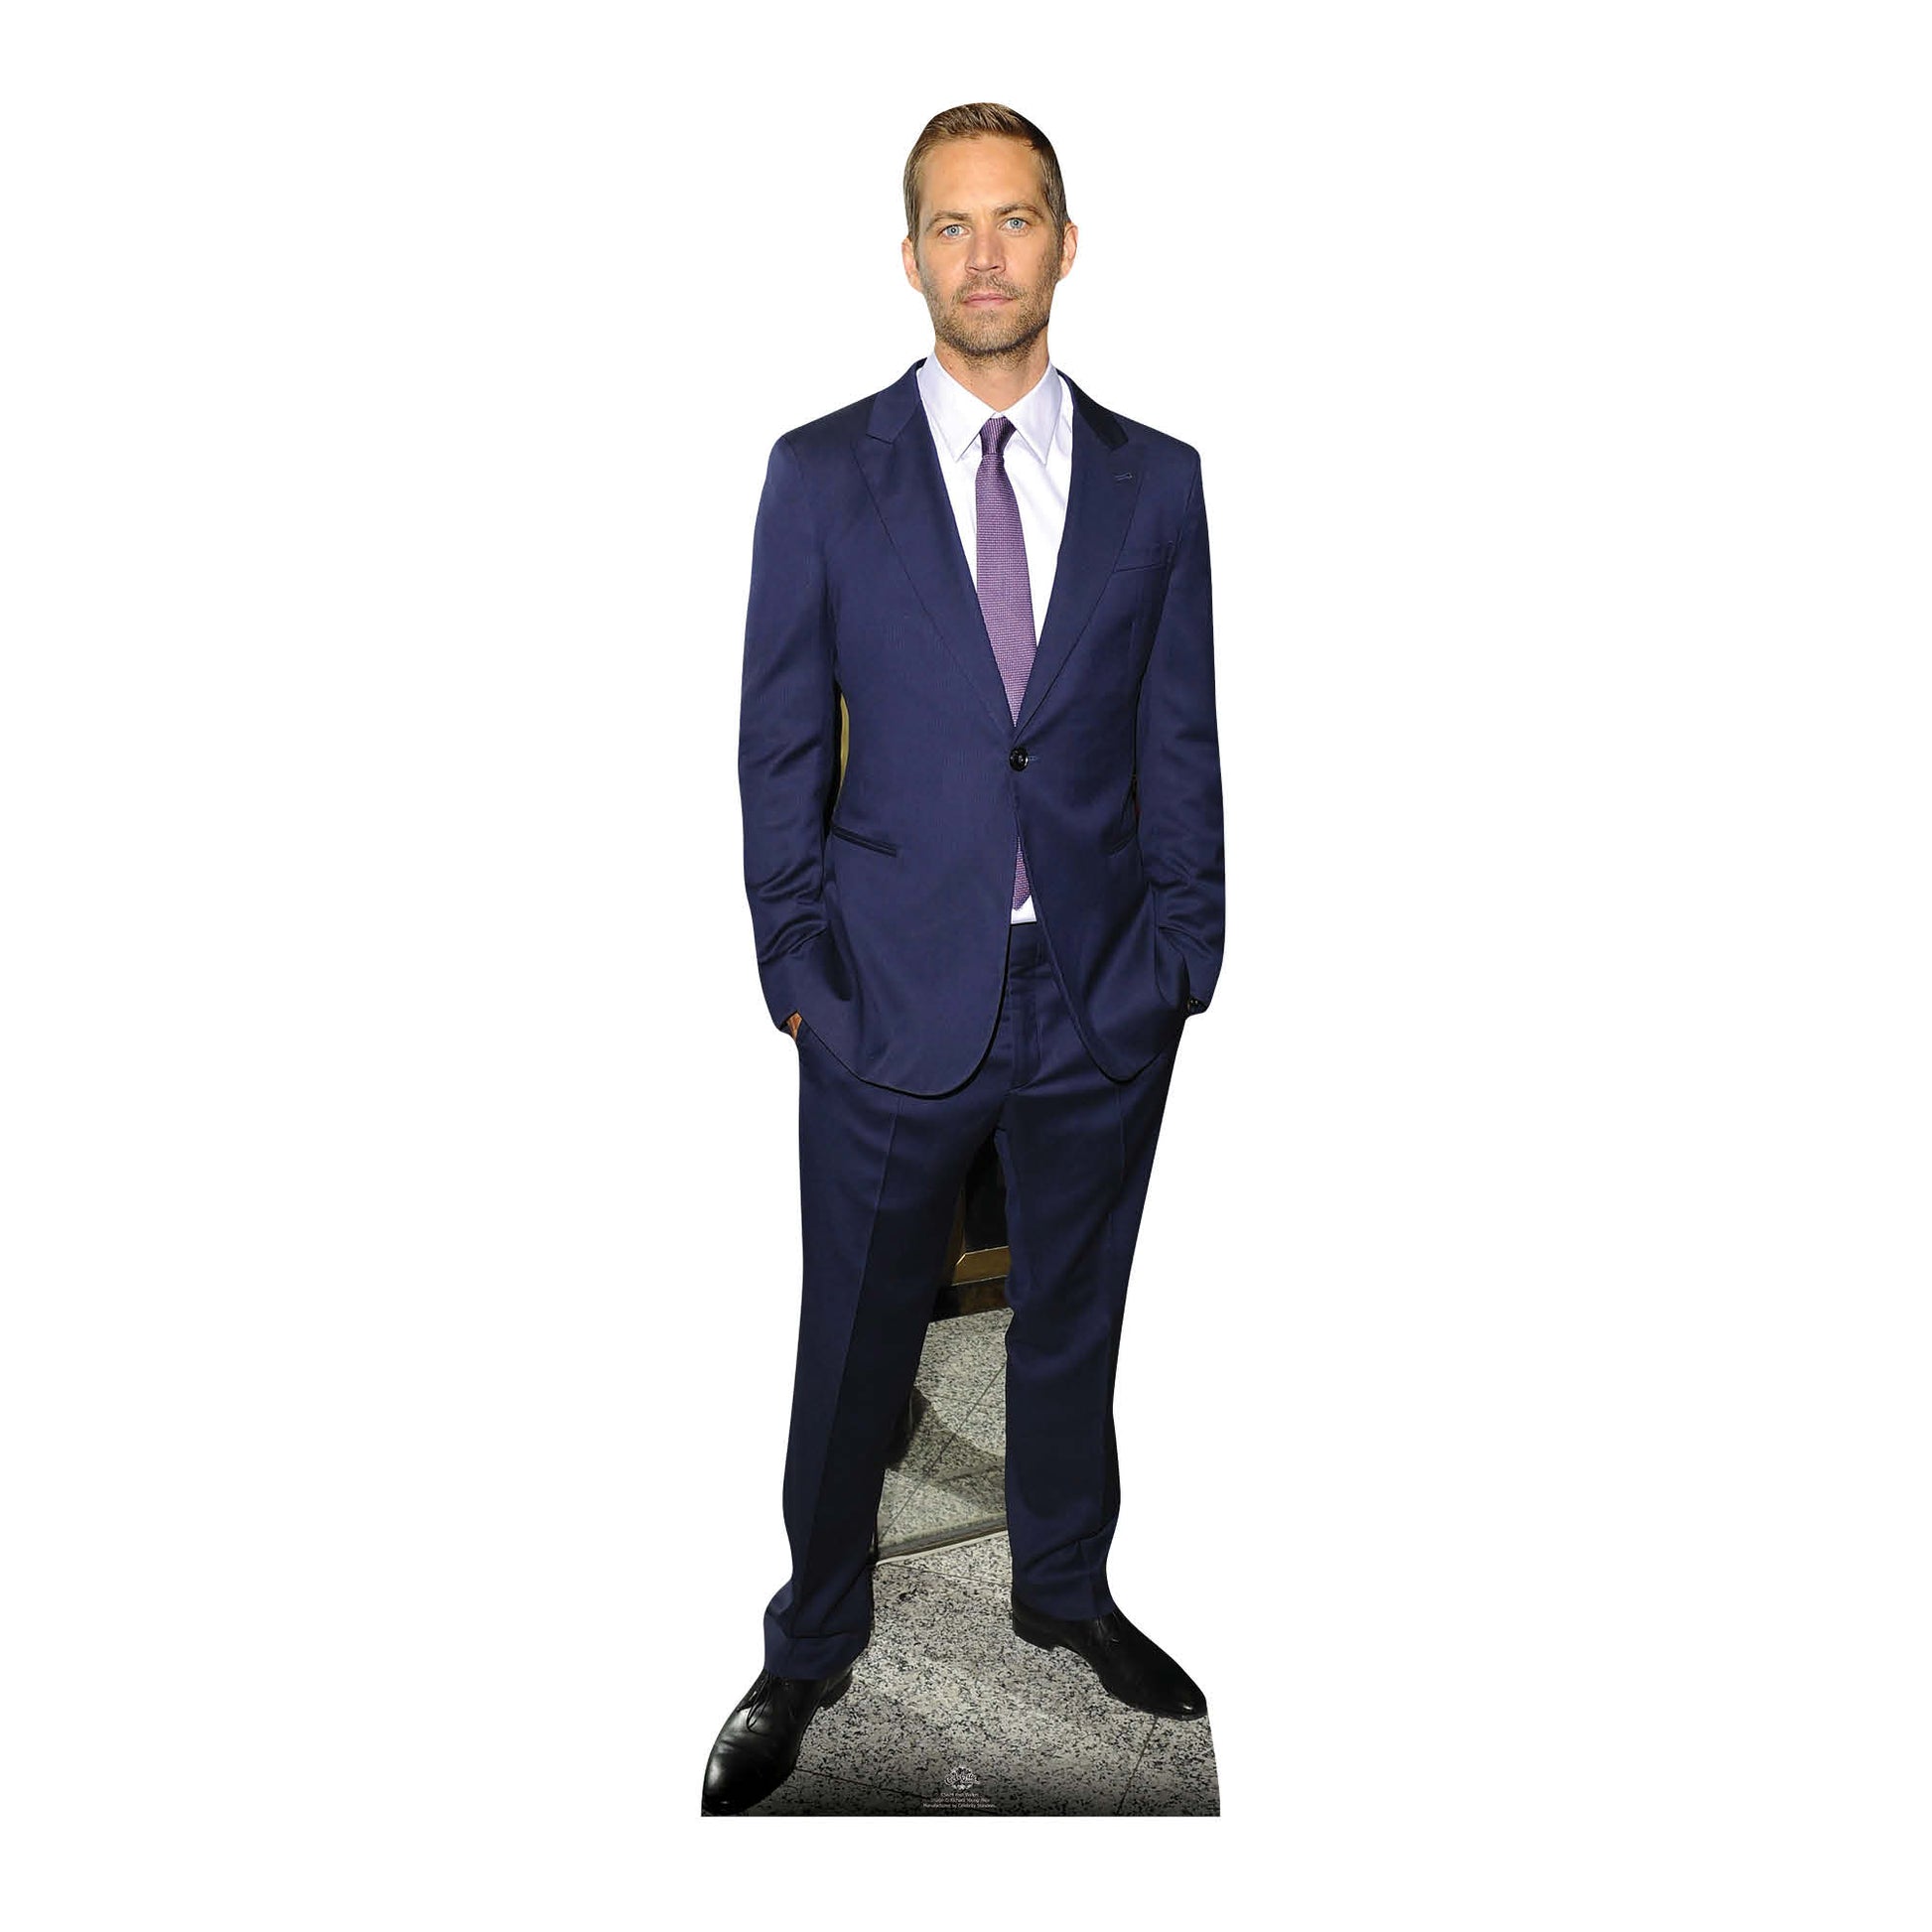 Paul Walker's Height and Weight